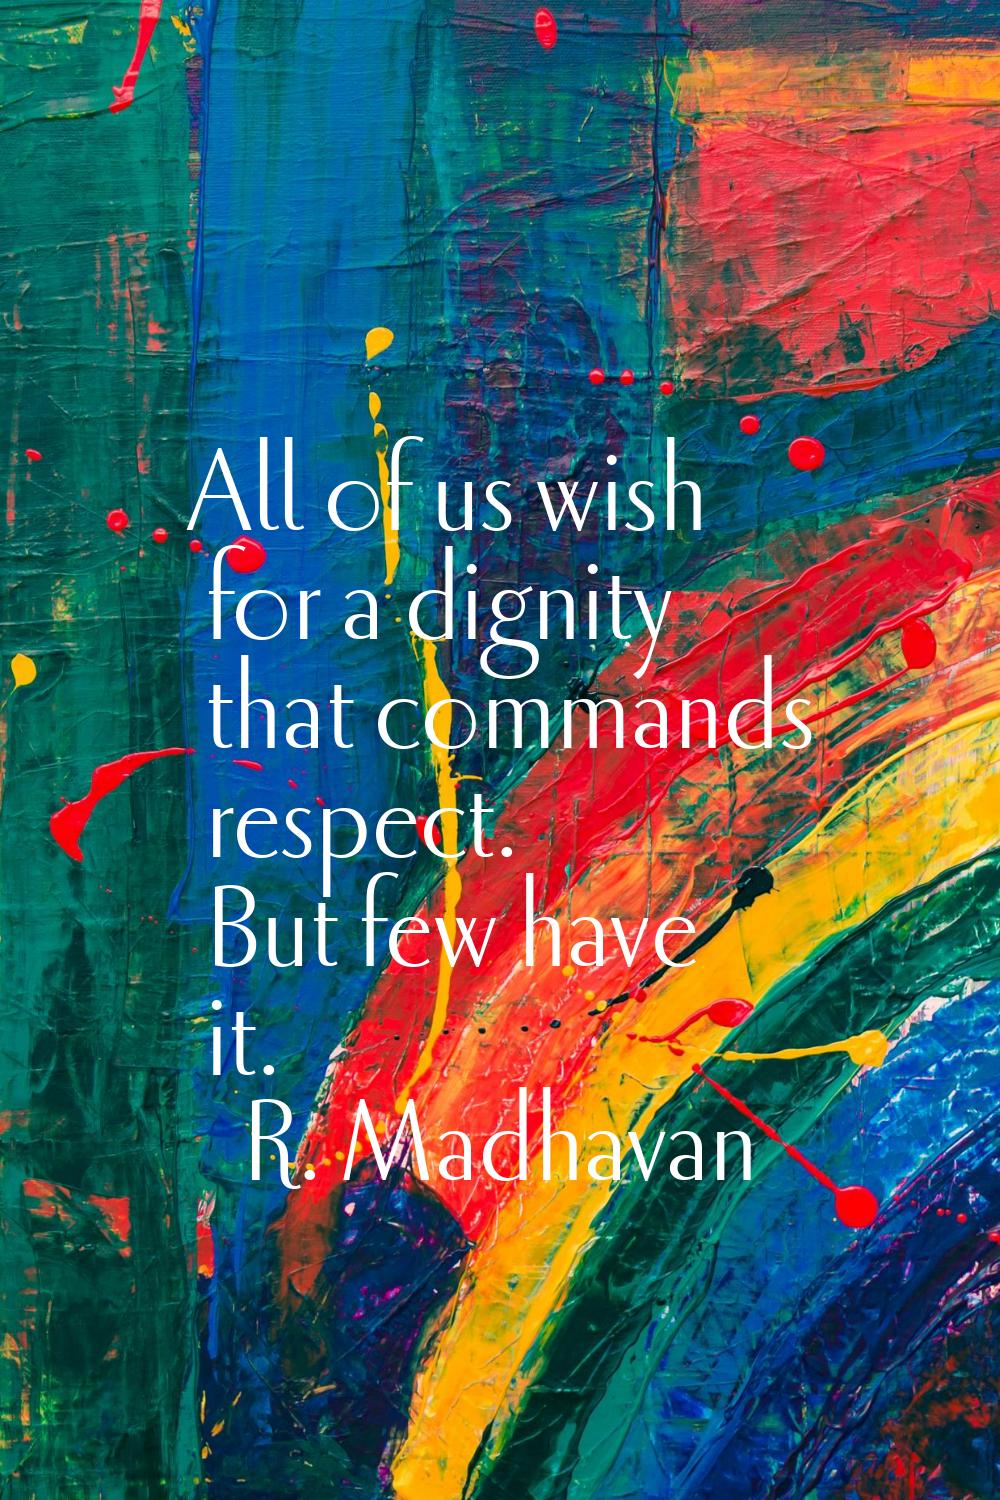 All of us wish for a dignity that commands respect. But few have it.